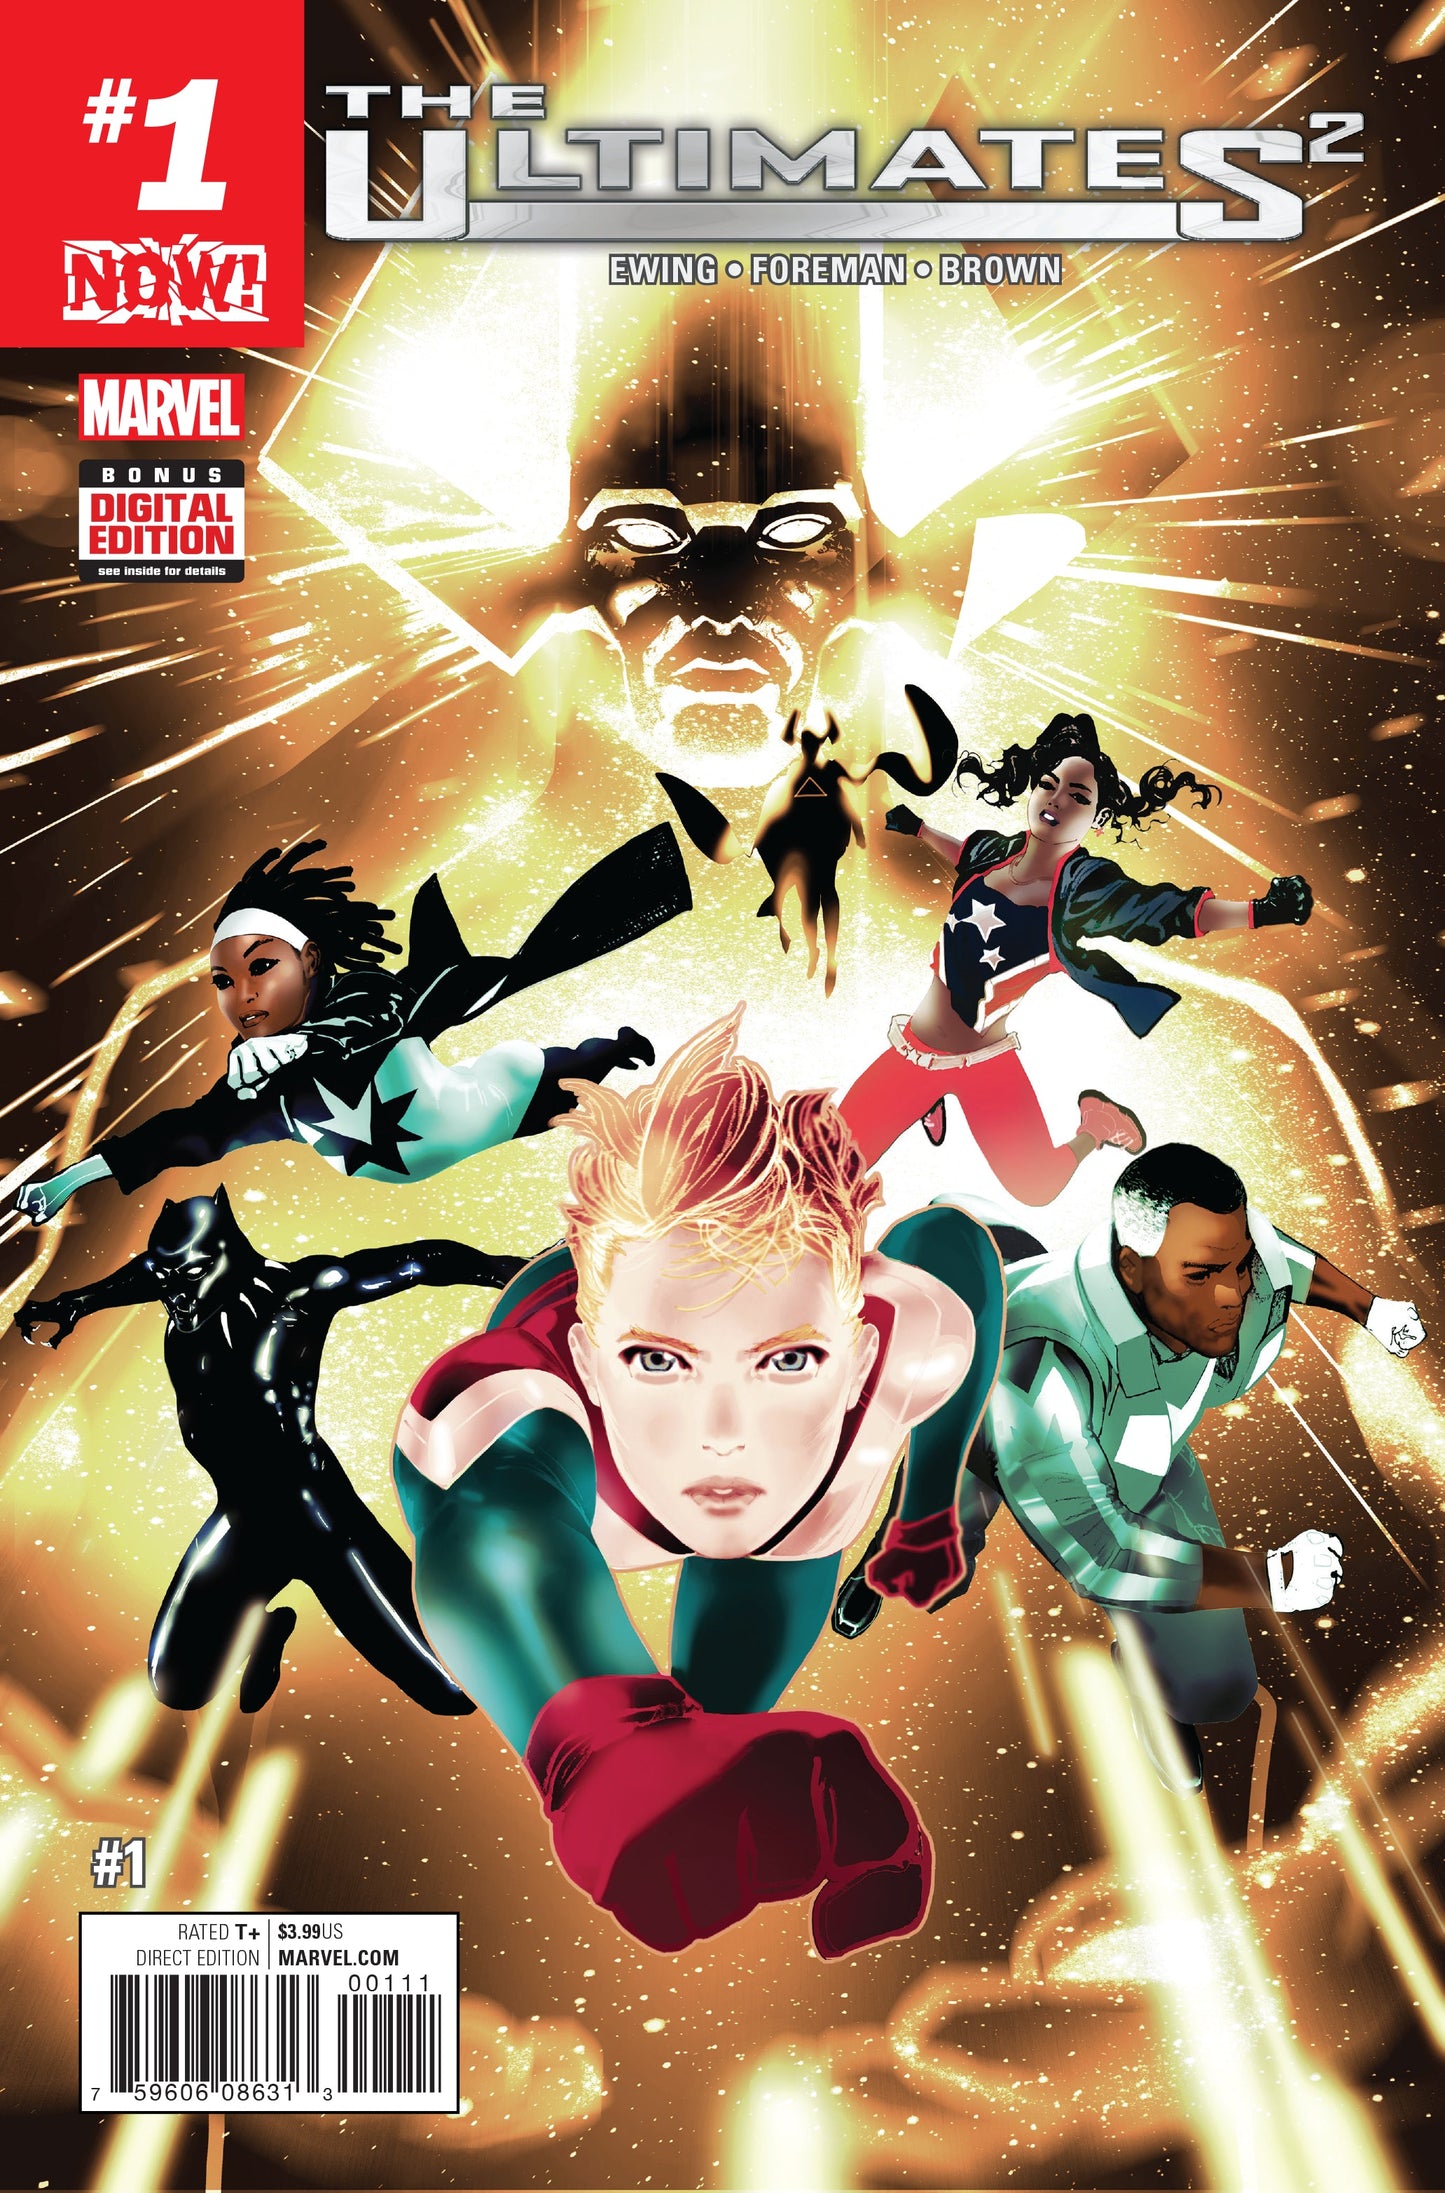 Now Ultimates 2 #1